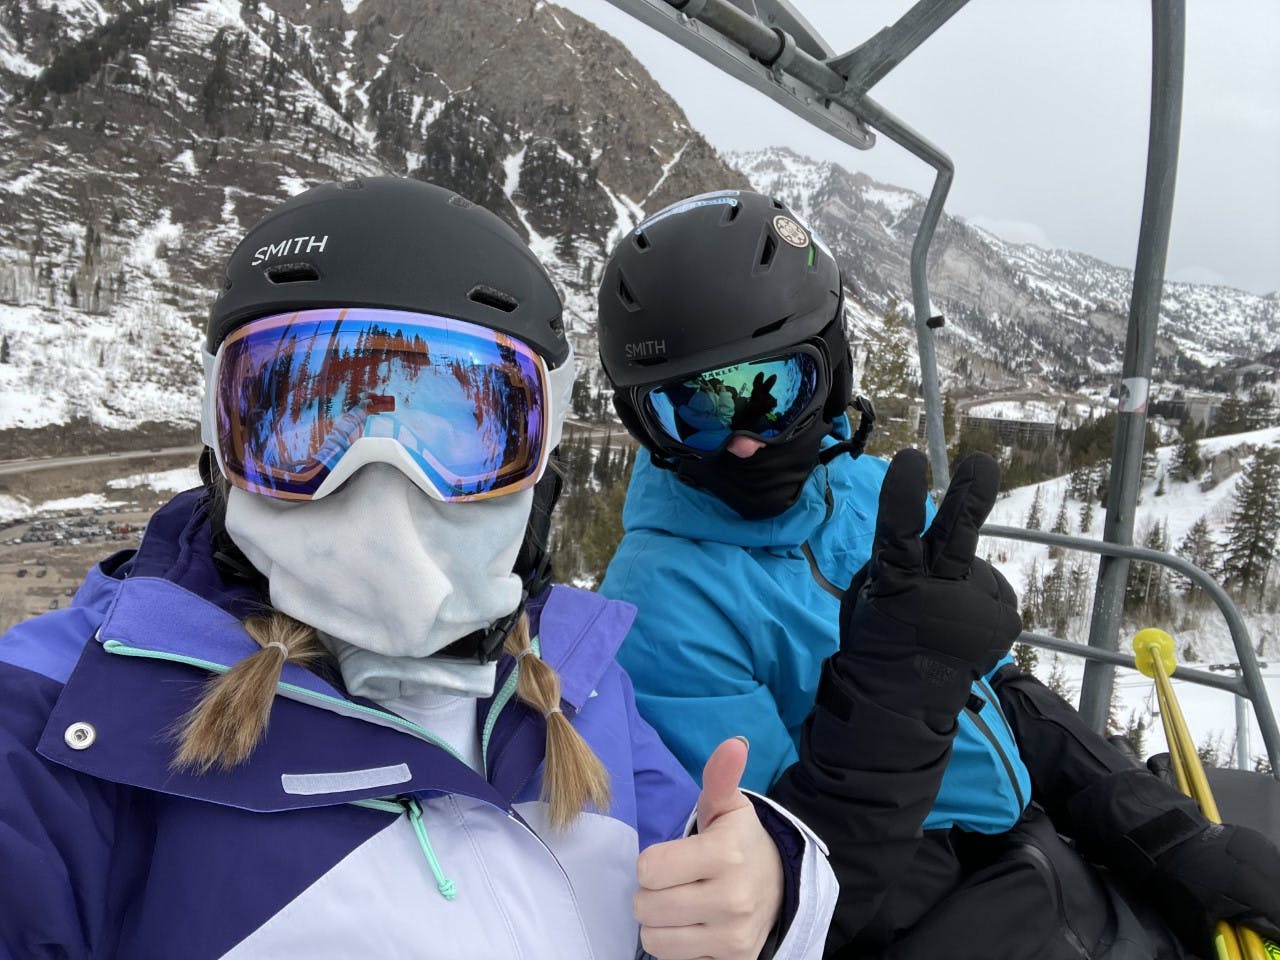 Two skiers sitting on a chairlift with helmets and goggles.